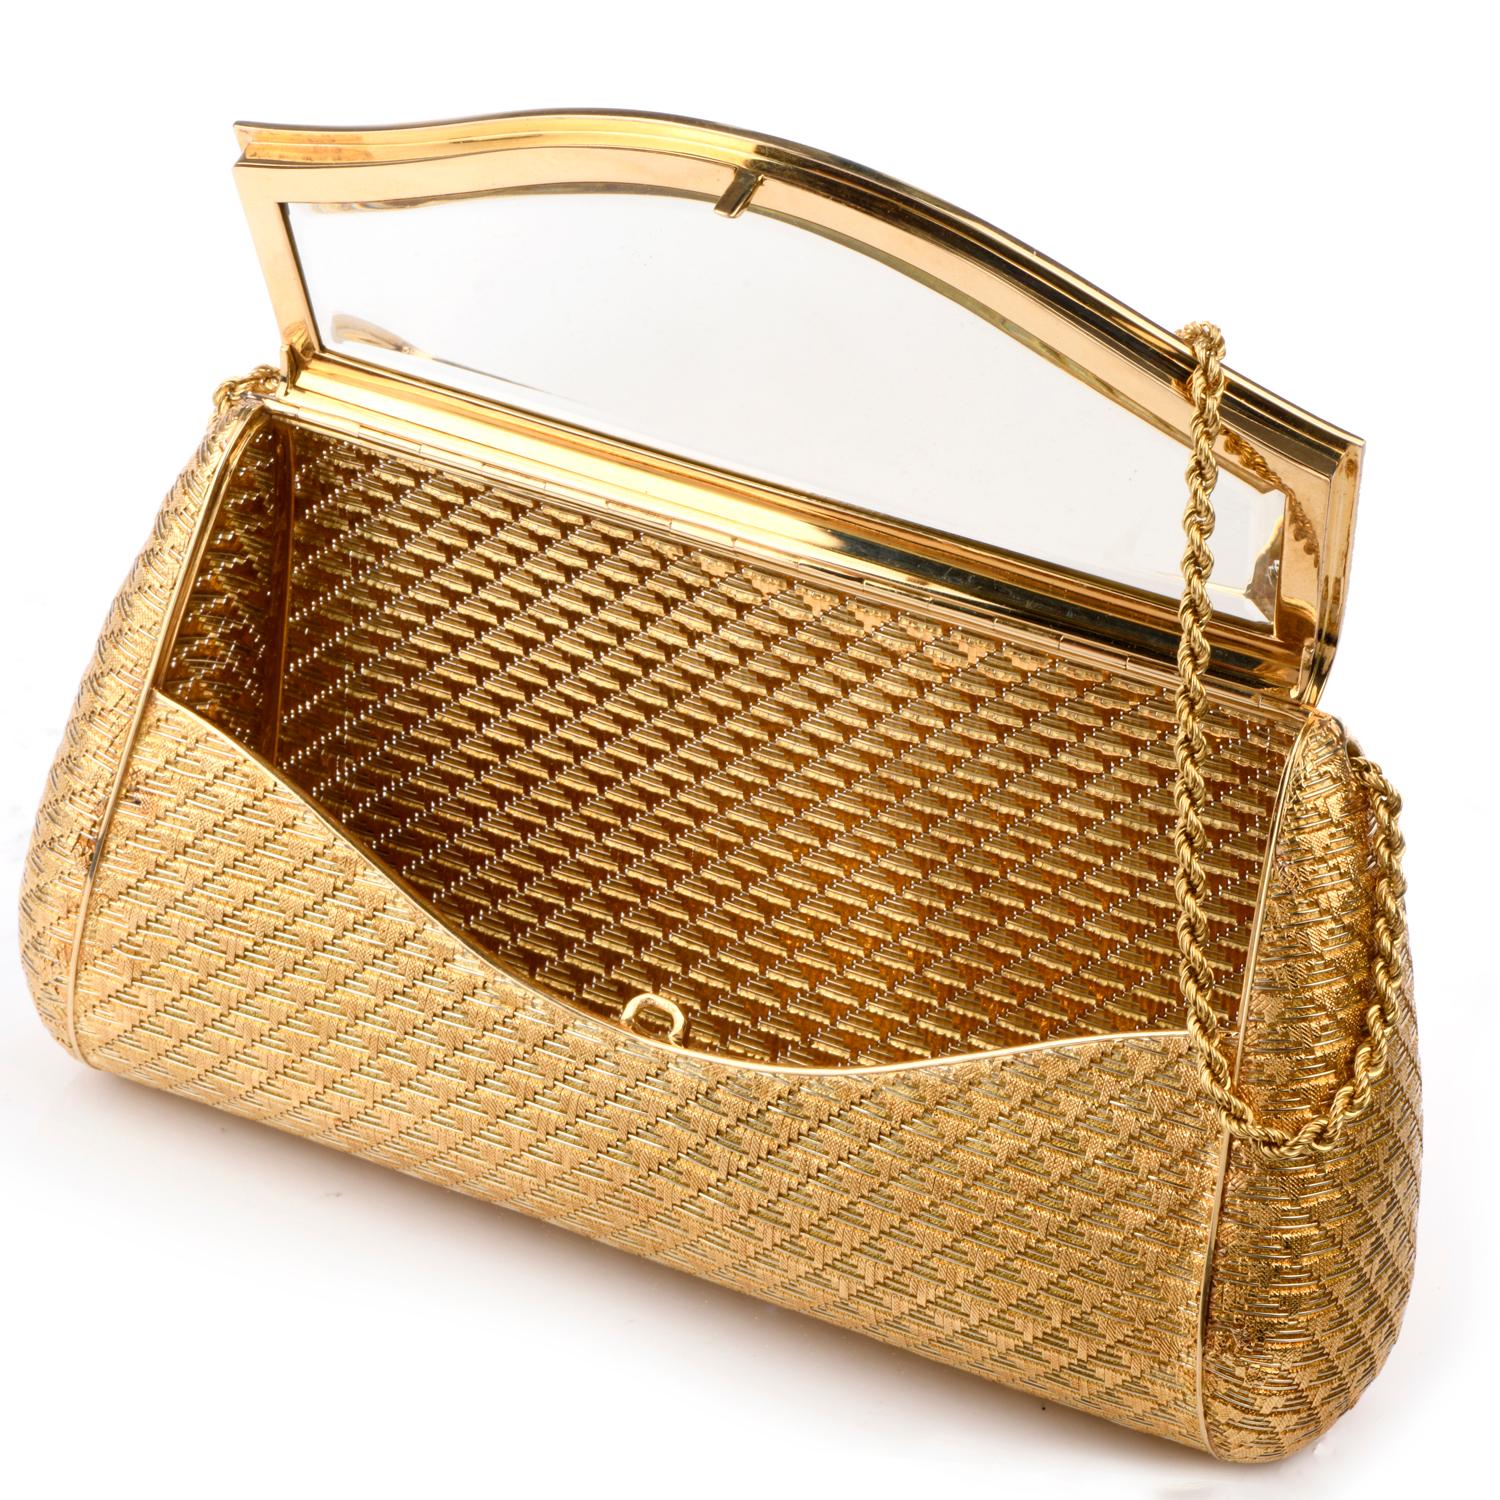 This exquisite Vintage Italian 1960's Clutch Purse was inspired with a soft textured 18k rope chain strap. Elegantly pattern with a hidden mirror in the interior and crafted in 408.6 grams of 18K yellow gold.  
Measures approximately 4in tall x 7in